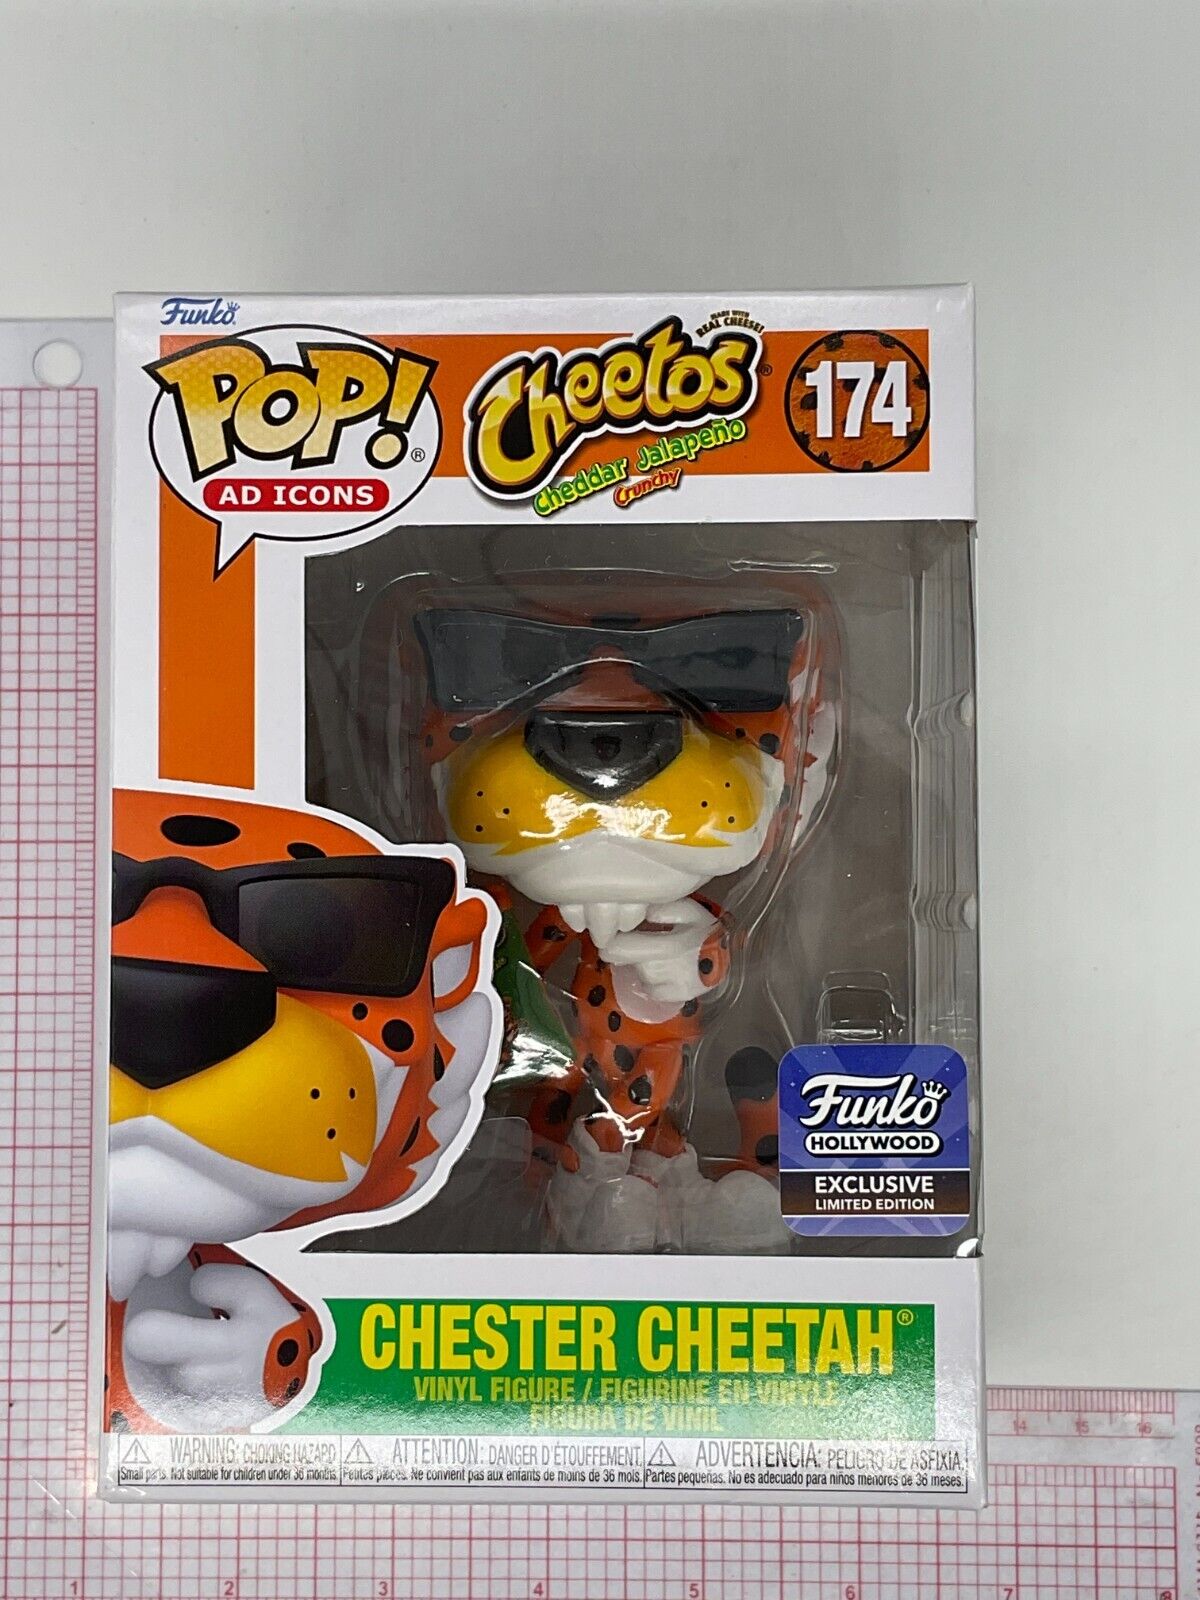 Funko POP Chester Cheetah #174 Hollywood Exclusive Vinyl Figure A03